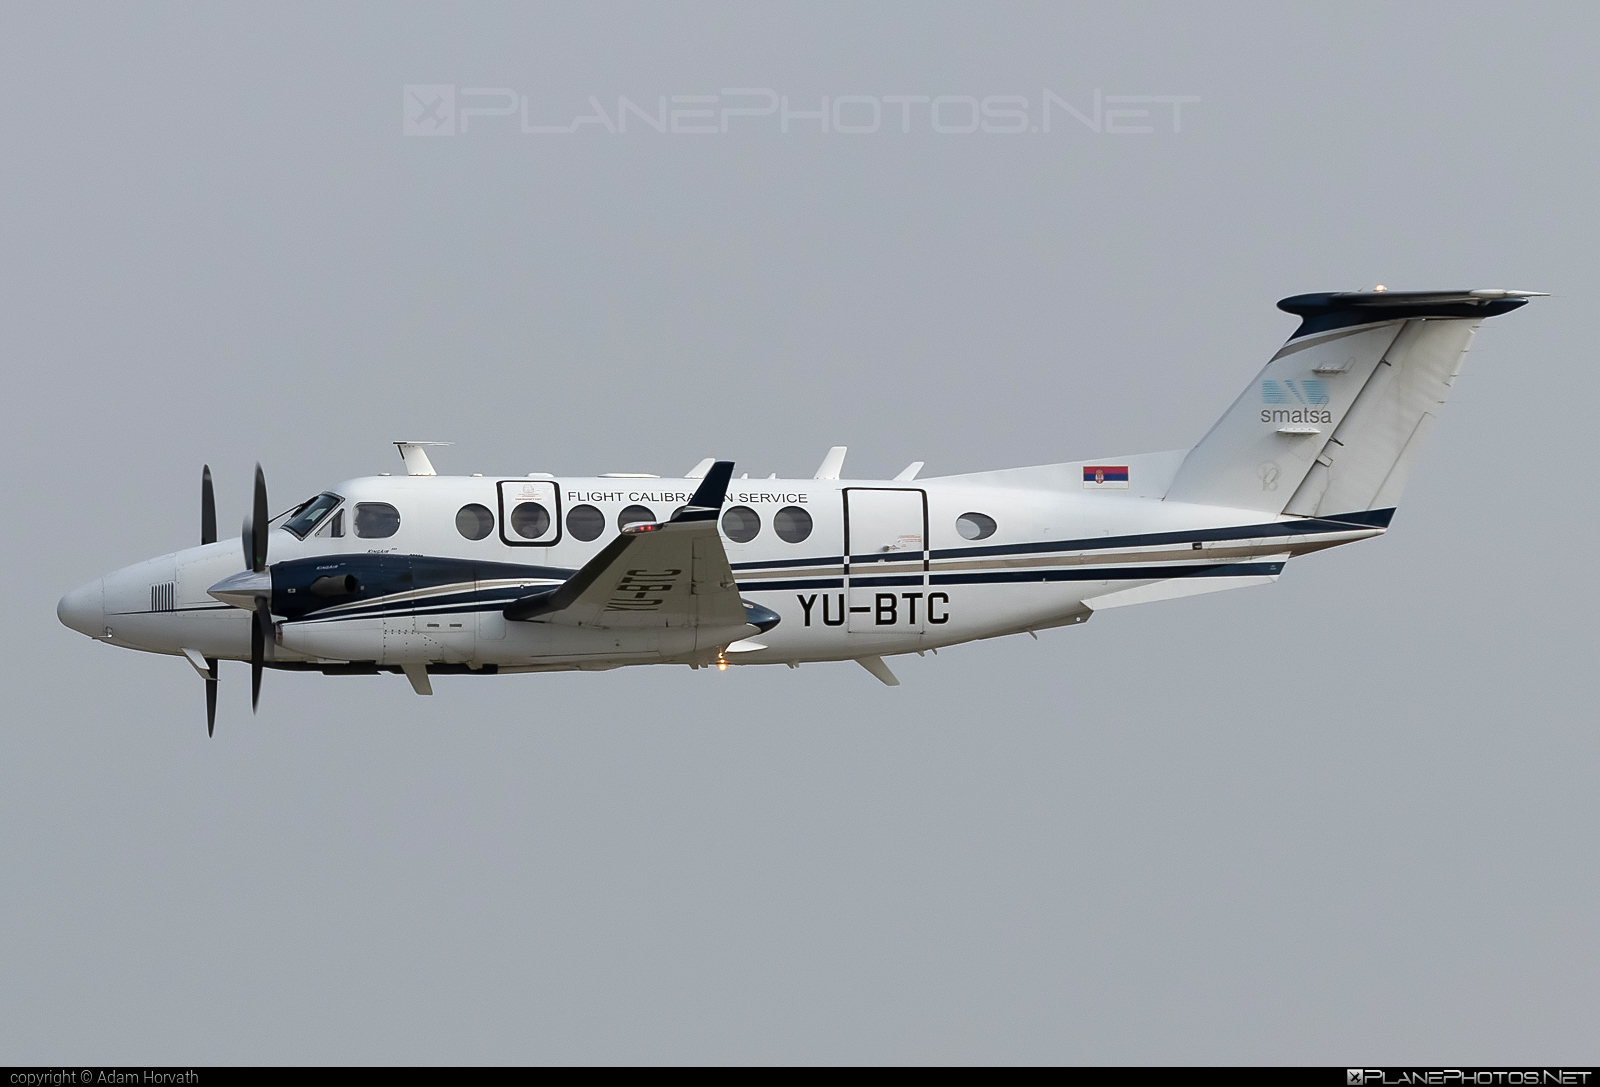 Beechcraft King Air 350 - YU-BTC operated by Serbia and Montenegro Air Traffic Services Agency (SMATSA) #beechb300 #beechcraft #beechcraftb300 #kingair #kingair350